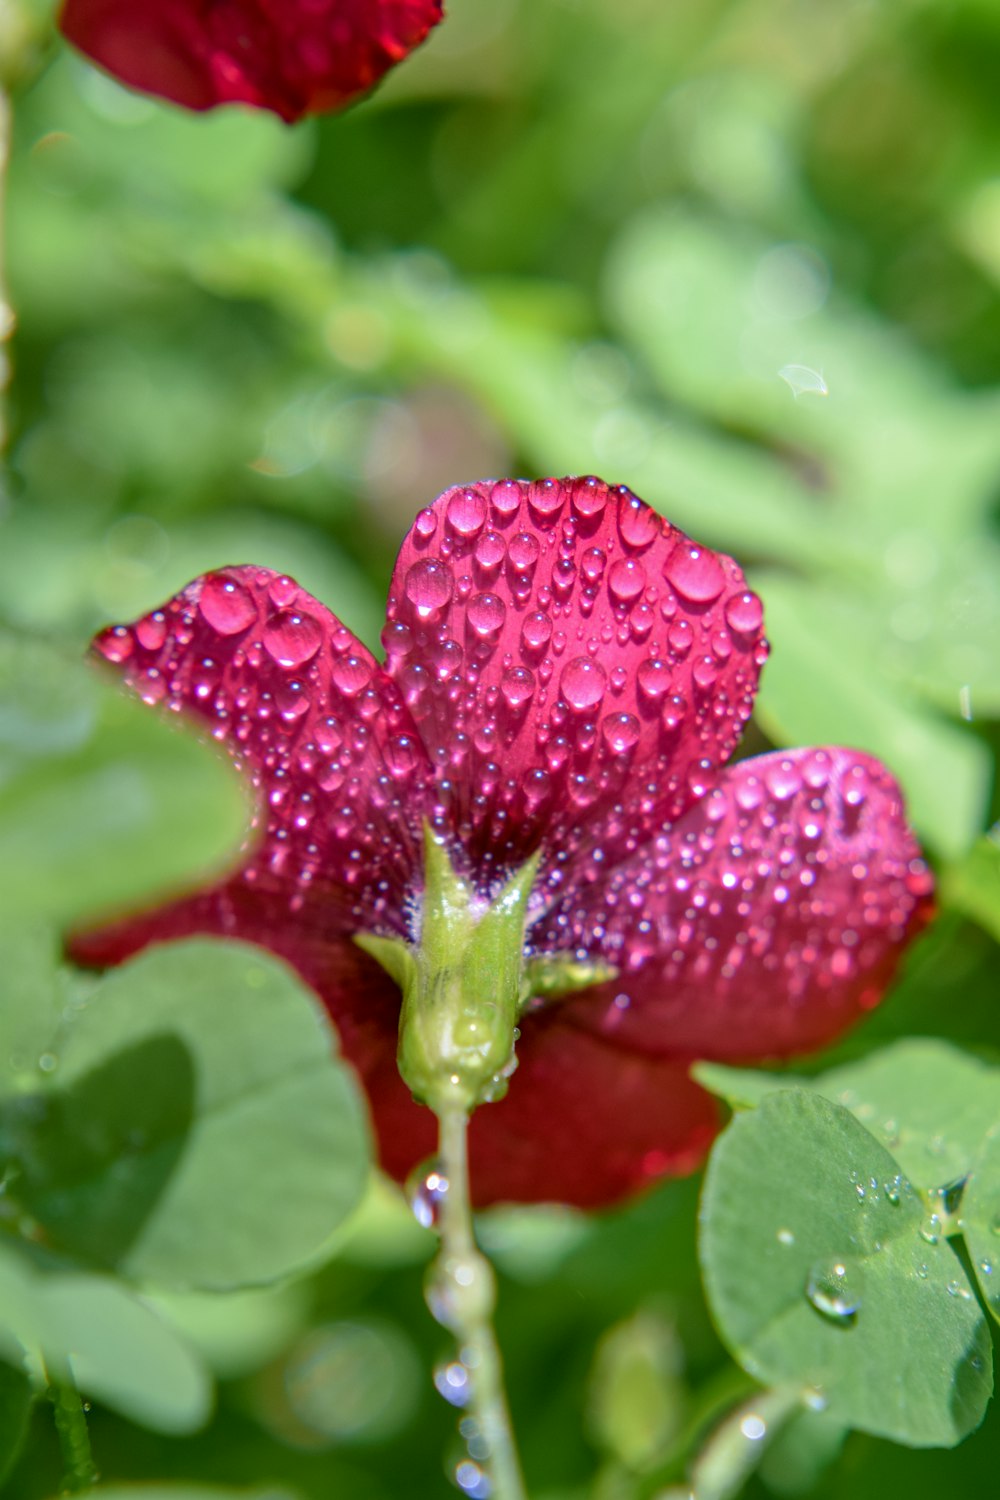 red flower with water droplets